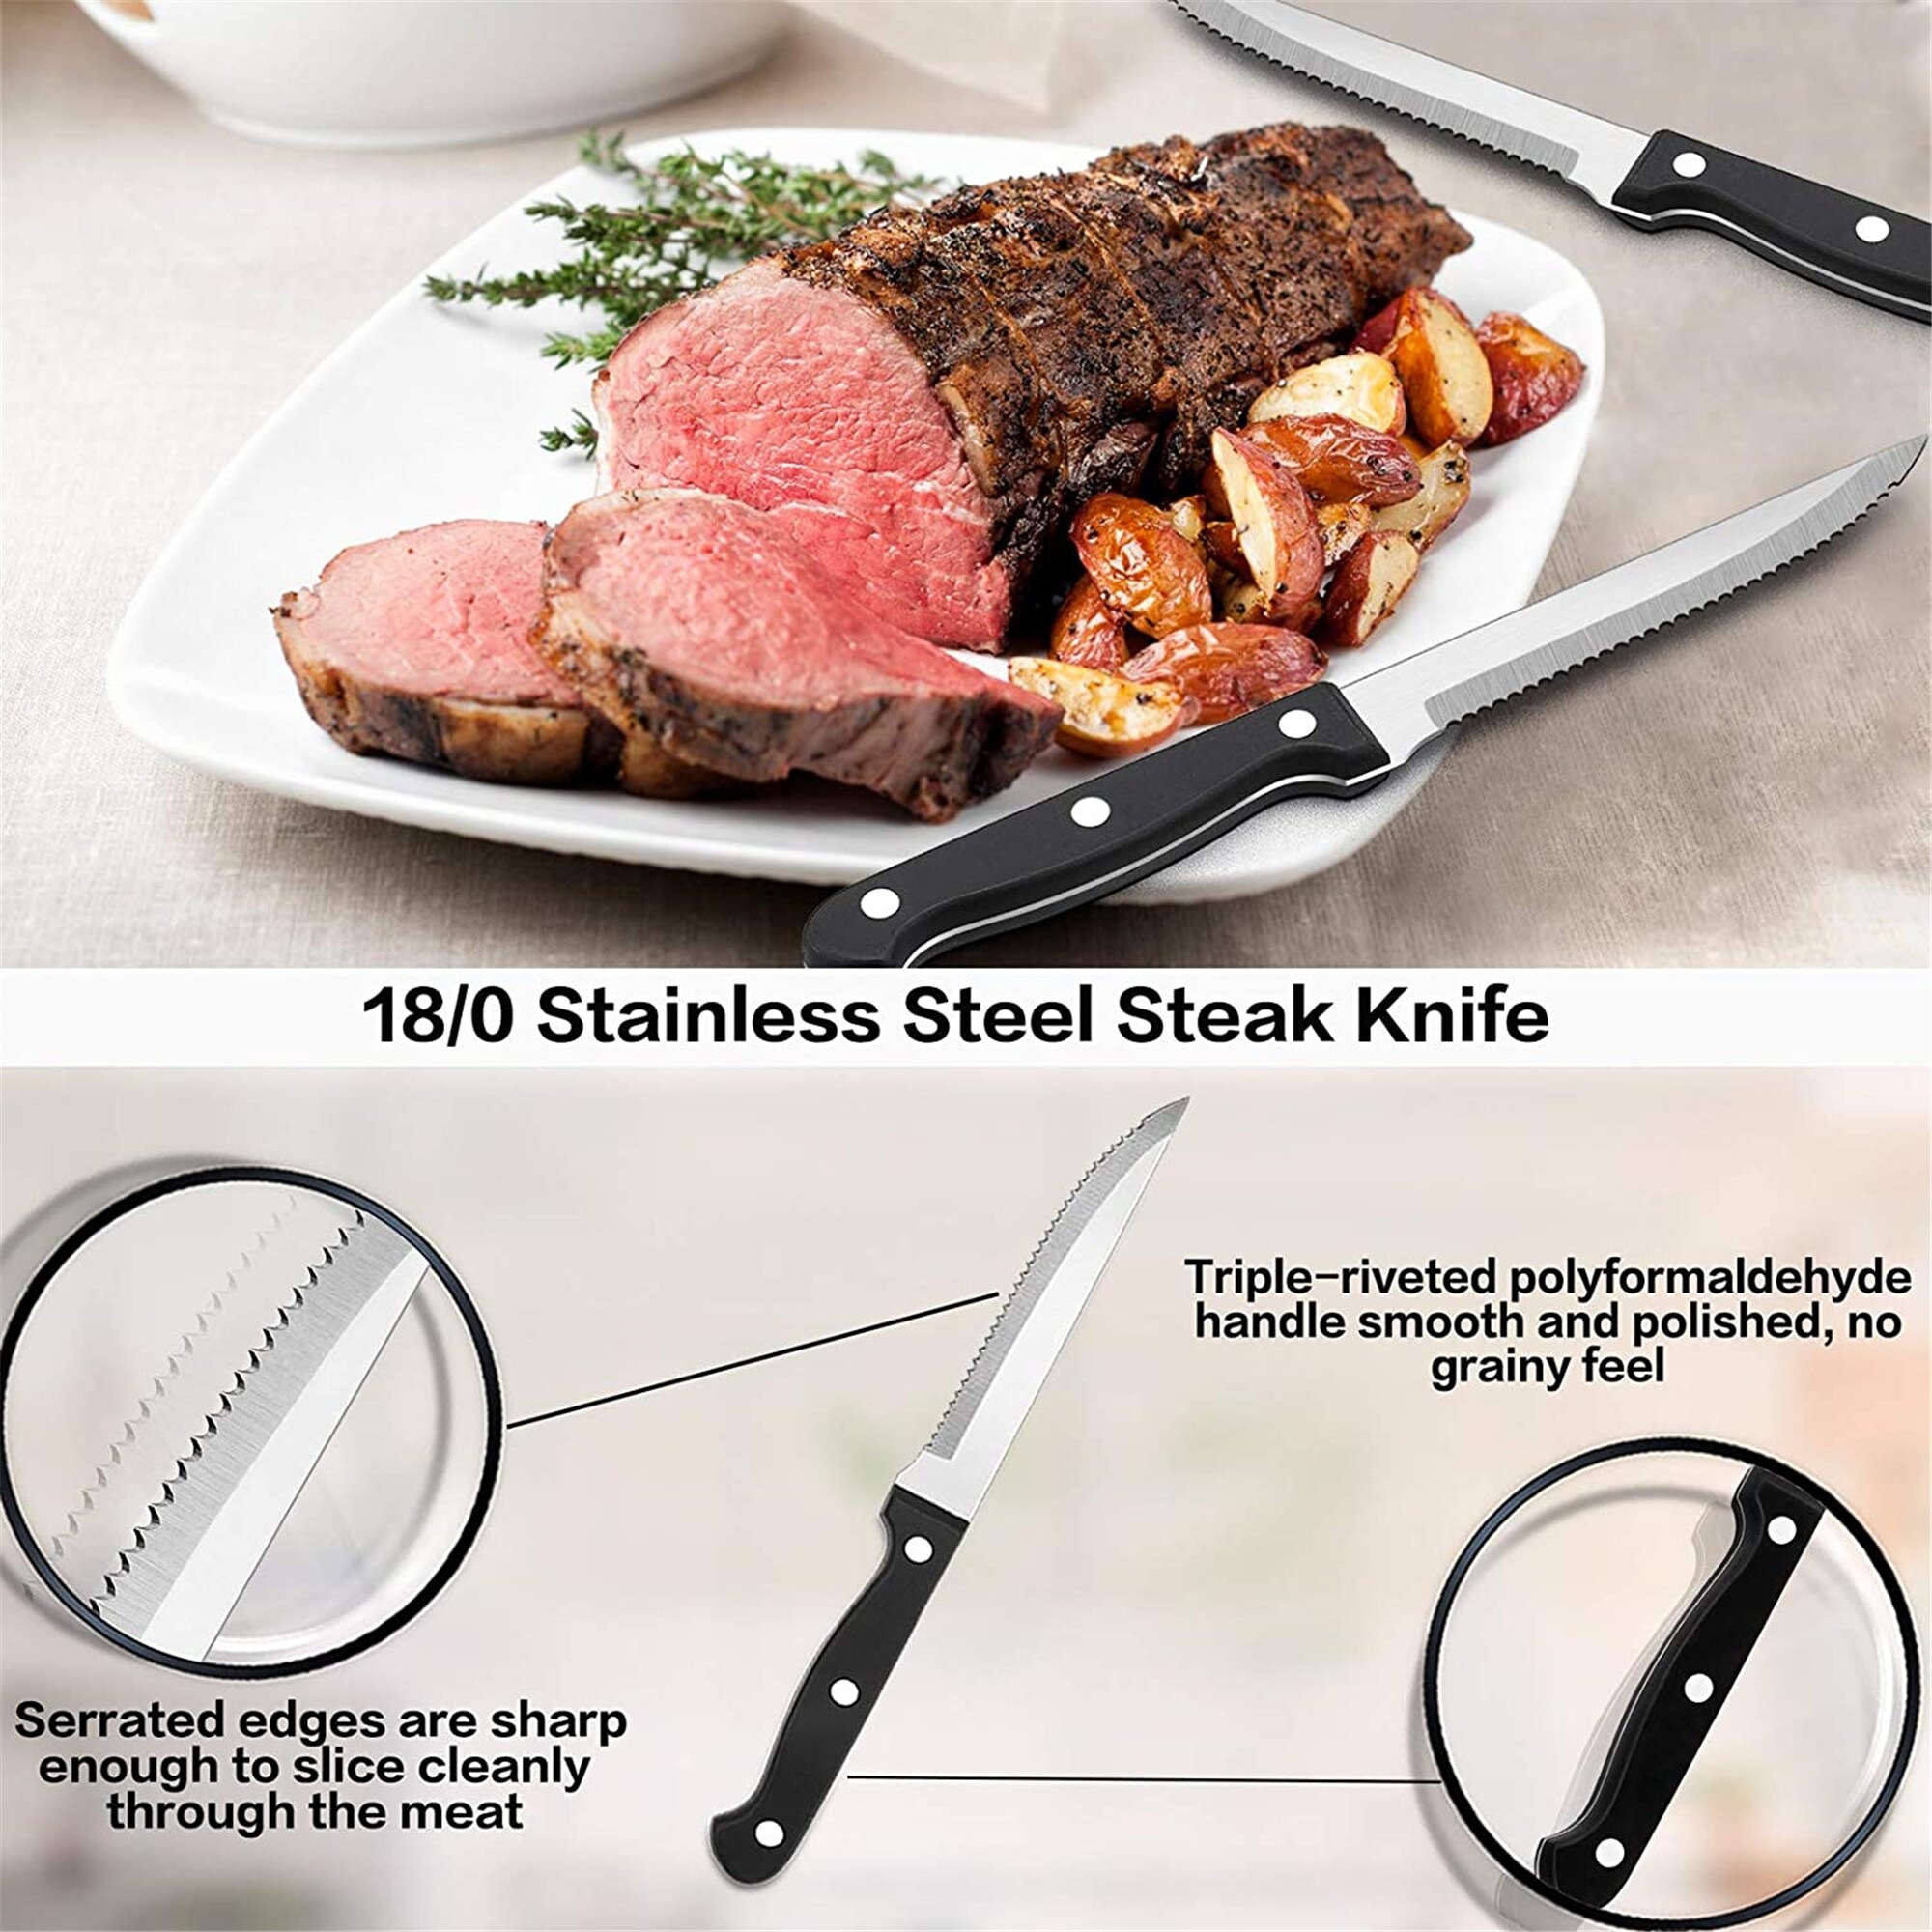 https://ak1.ostkcdn.com/images/products/is/images/direct/7f8283e8c6a71d2747d7ecf2dfafb5bdf57e70d0/24-Piece-Silverware-Set-with-Steak-Knives-and-Organizer-Tray%2C-Stainless-Steel-Flatware%2C-Mirror-Polished%2C-Dishwasher-Safe.jpg